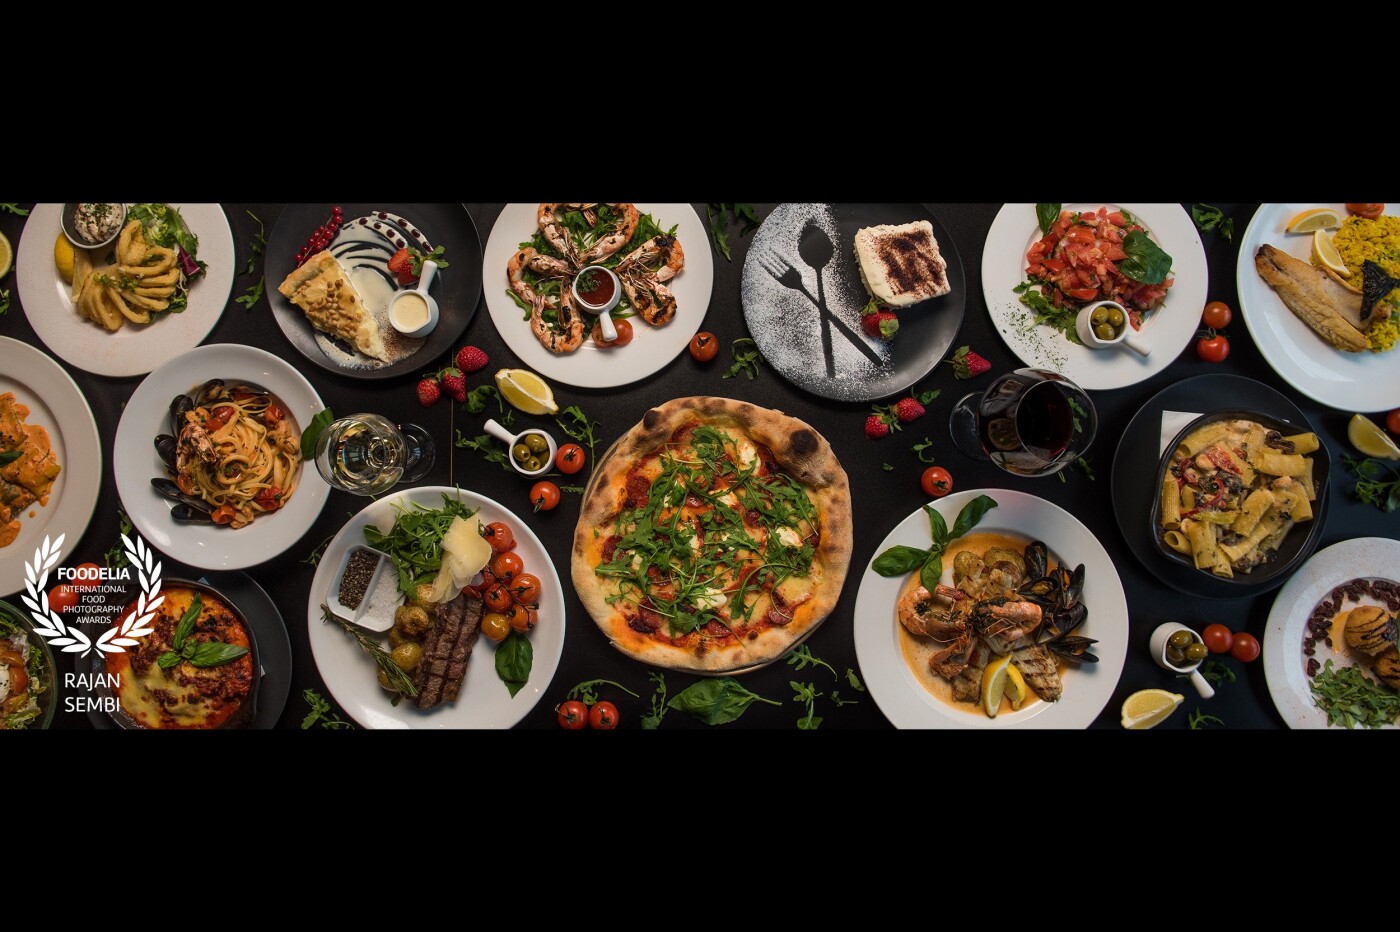 Italian Feast. This photo includes a range of modern Italian dishes including starters, mains & desserts. The dishes are surrounded by some of the key ingredients included in Italian cuisine.<br />
I used a Nikon D750 with a 24-70mm lens to shoot this.